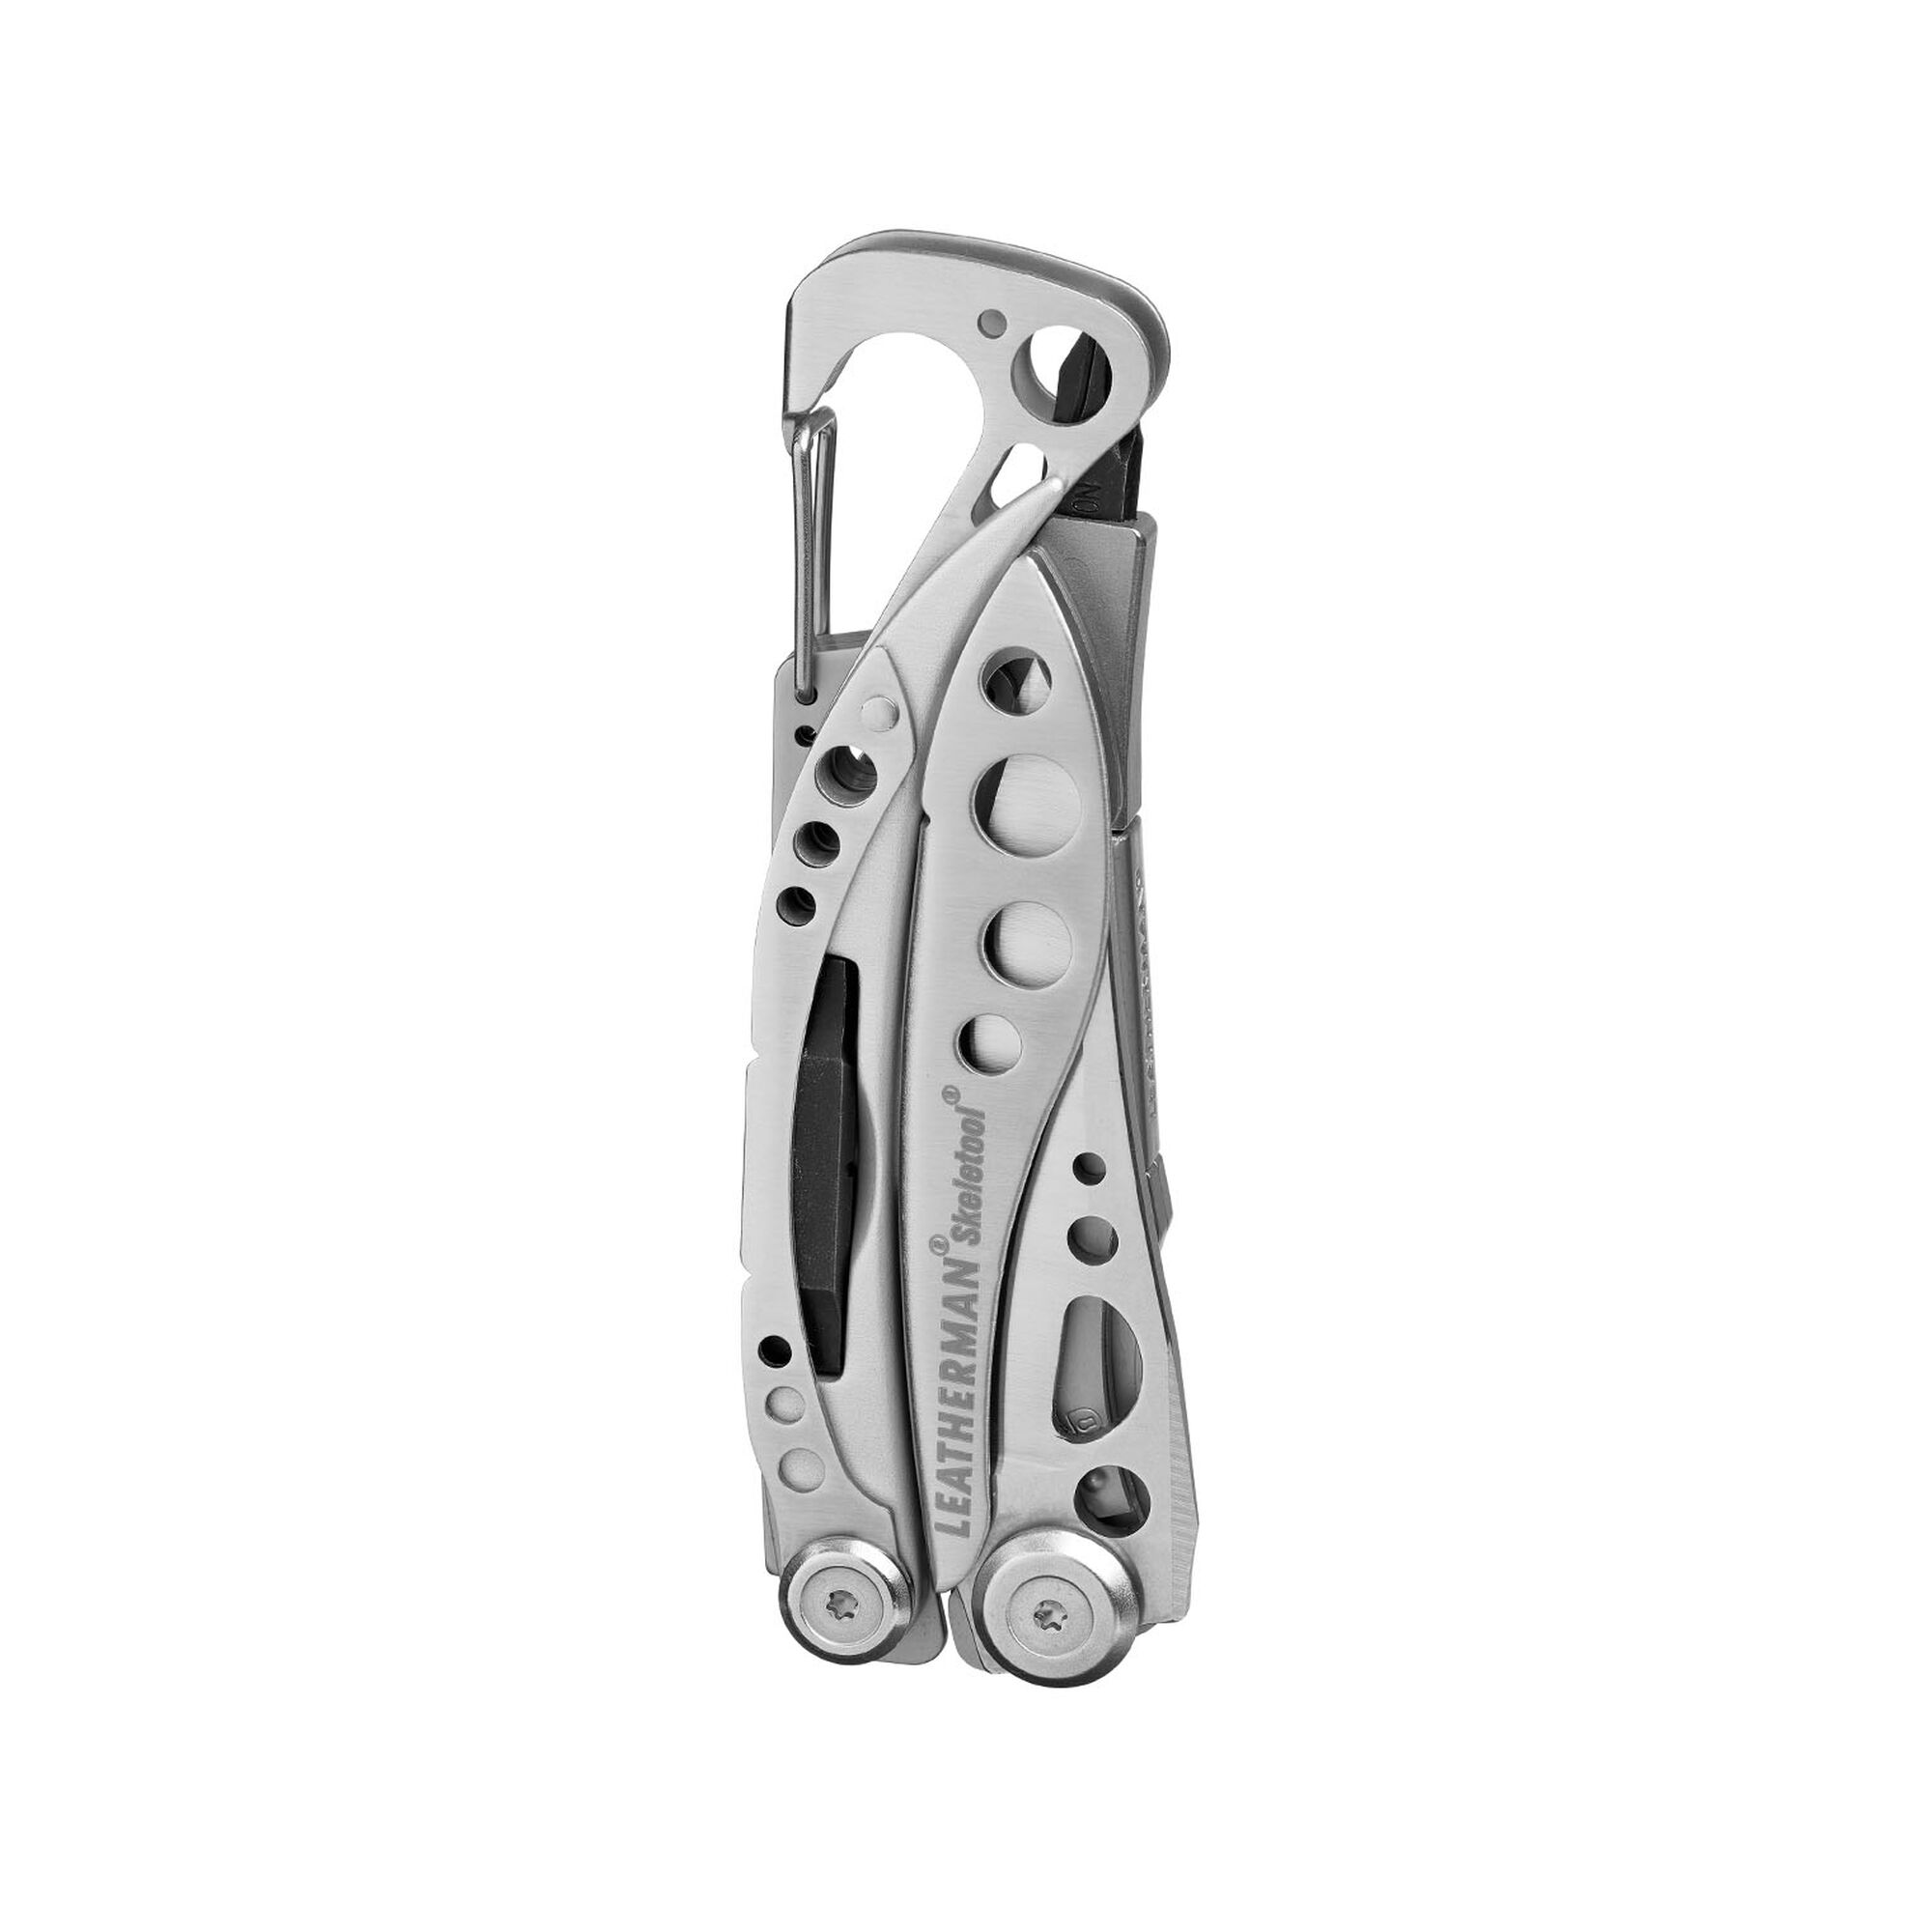 LEATHERMAN, Signal, 19-in-1 Multi-tool for Outdoors, Camping, Hiking,  Fishing, Survival, Durable & Lightweight EDC, Made in the USA, Stainless  Steel with Nylon Sheath 